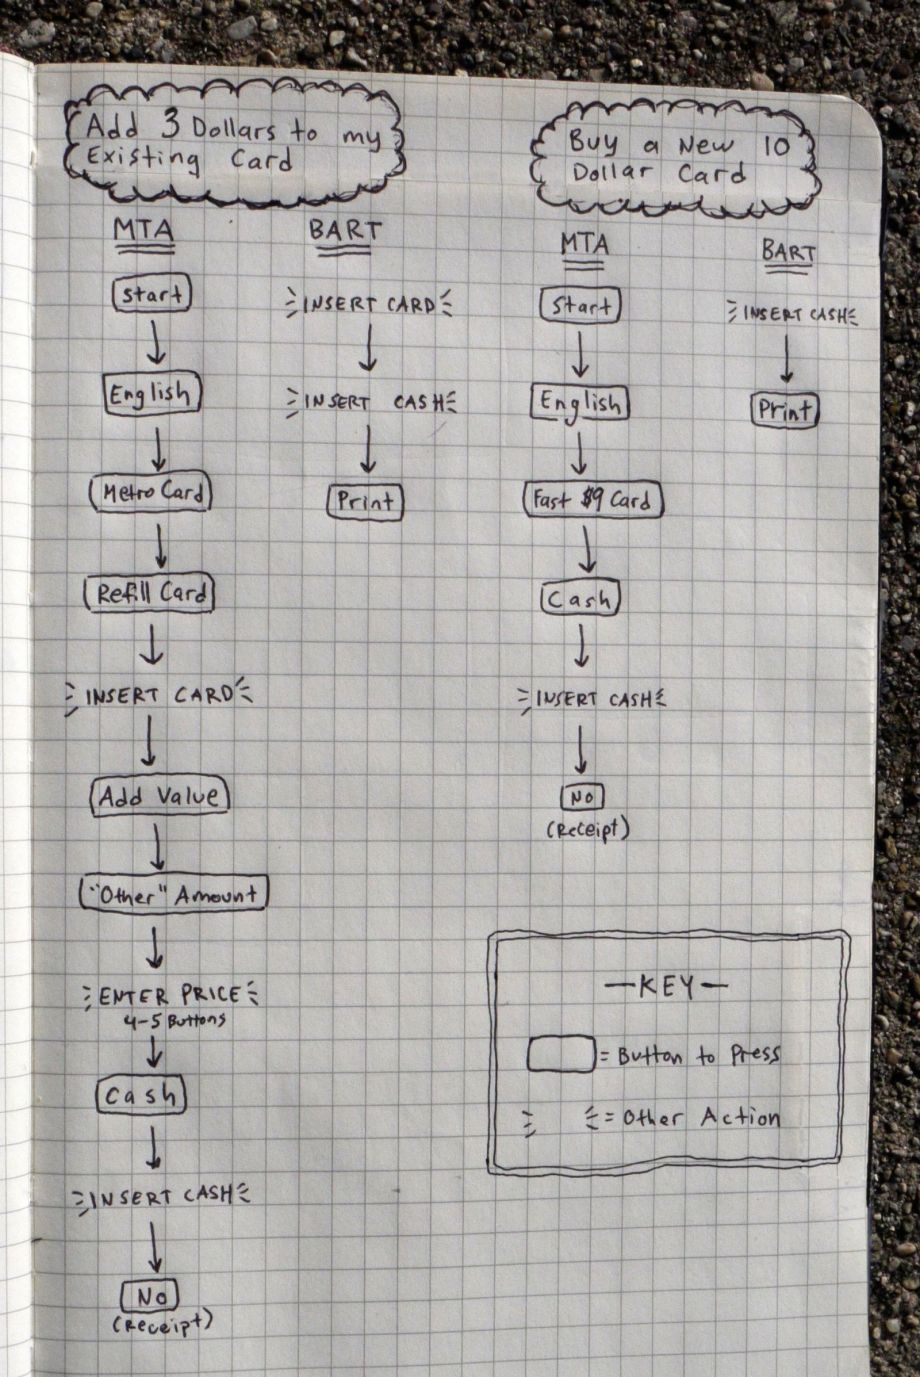 A notebook showing how many more steps it takes to buy a transit card in NYC vs BART. BART is 2 steps in some cases, with MTA being at least 6.